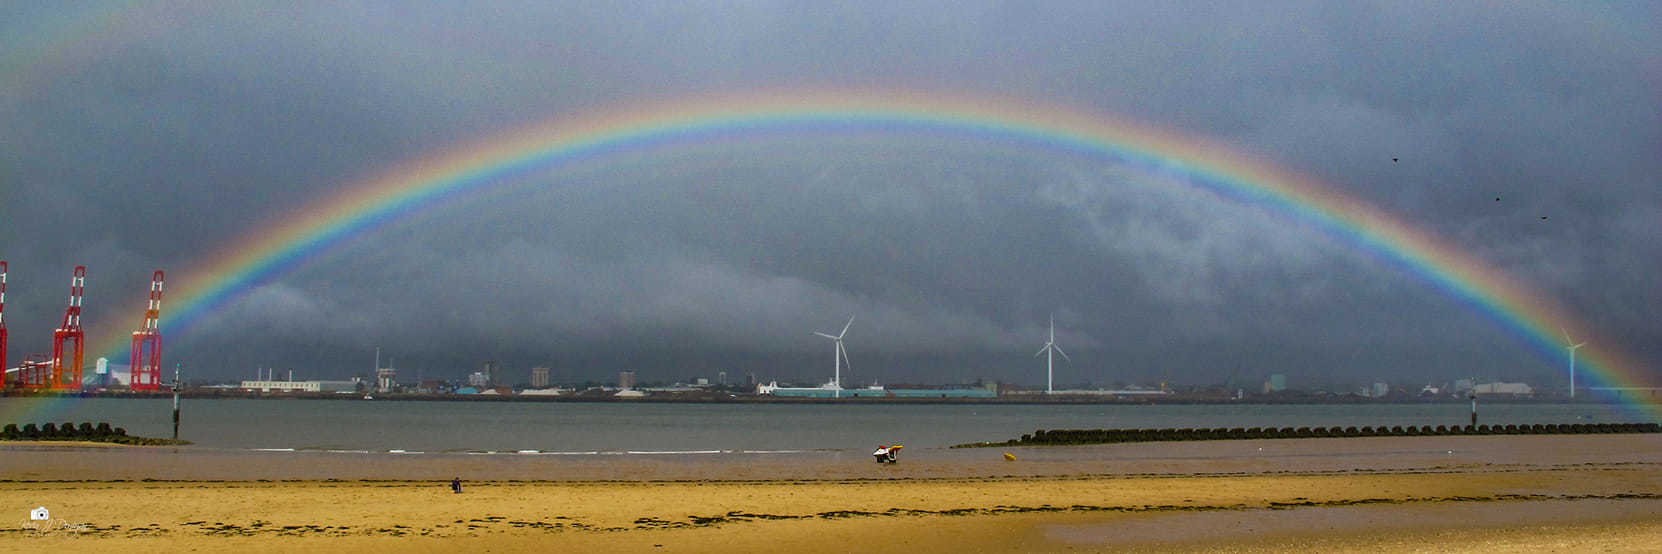 A full rainbow in New Brighton by Kevin Donegan